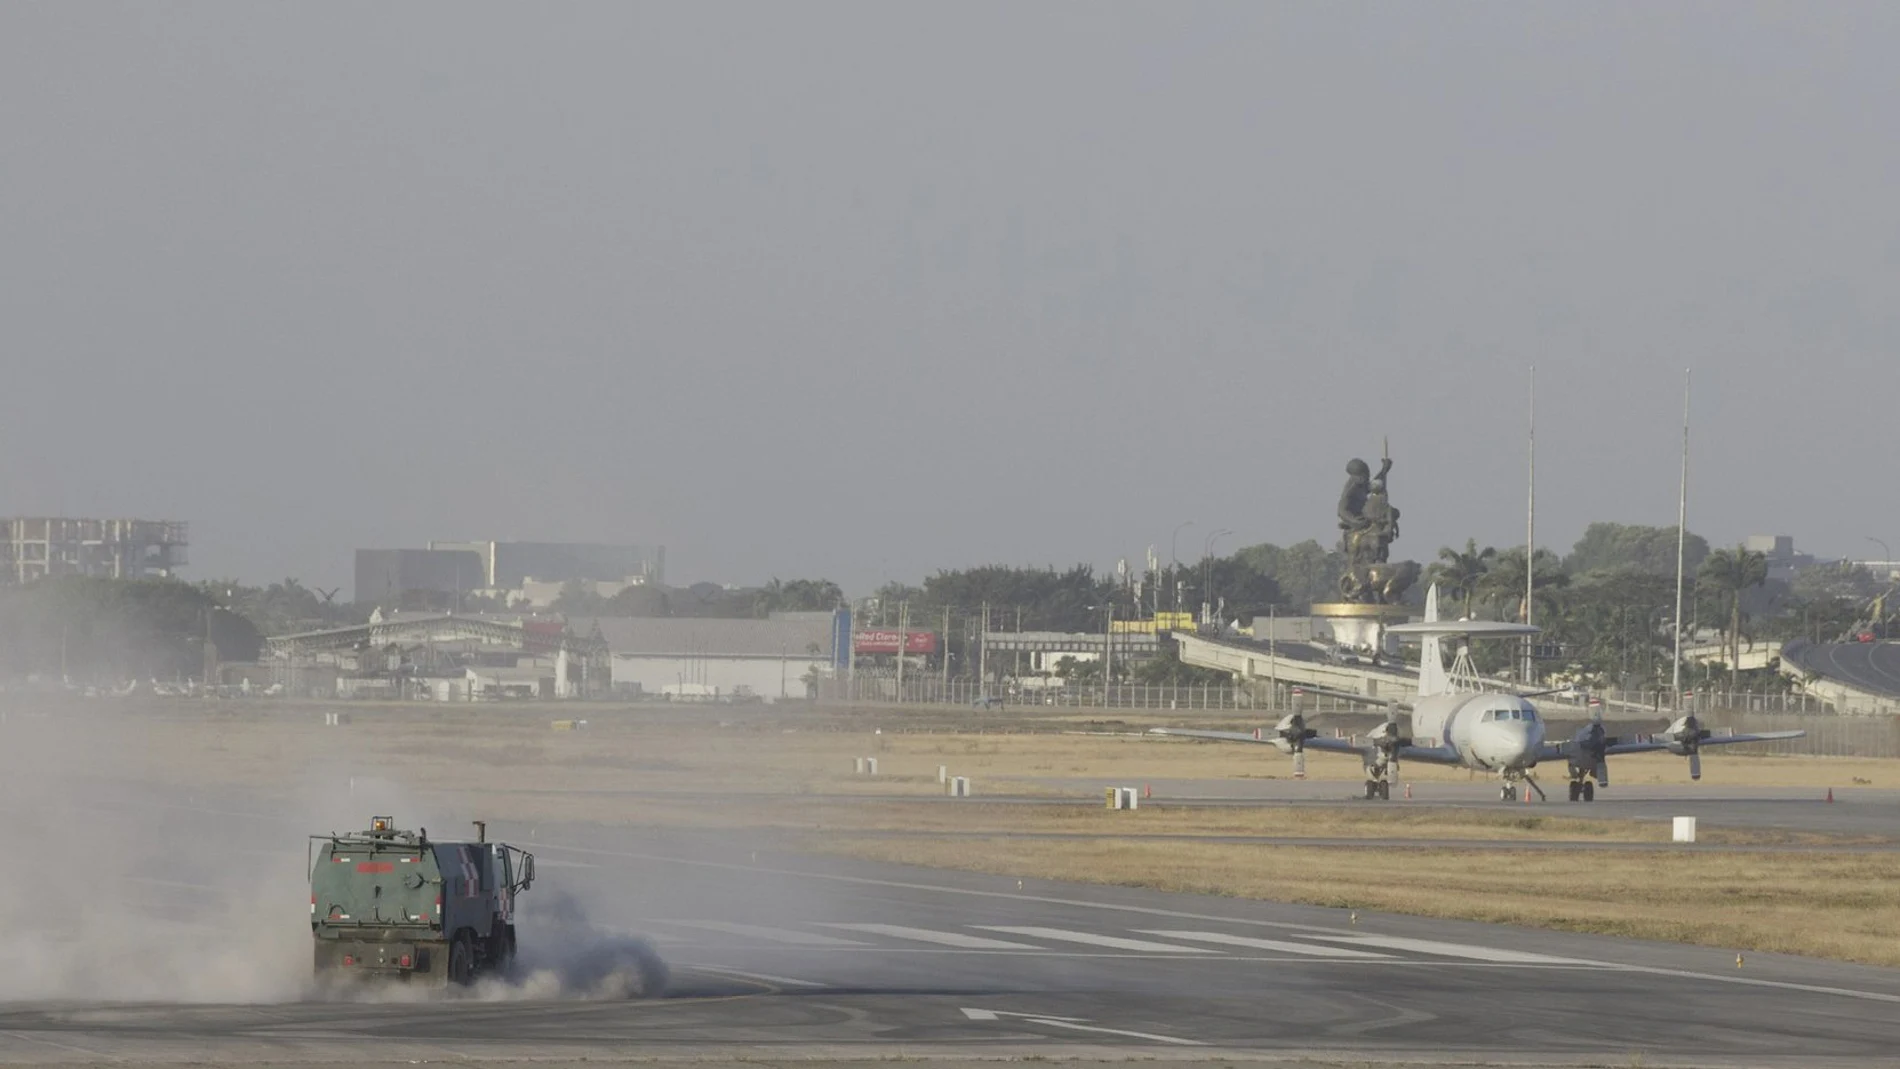 A street sweeper truck clears volcanic ash from the runway of the Jose Joaquin de Olmedo international airport in Guayaquil, Ecuador, Sunday, Sept. 20, 2020. An intense volcanic ash fall was registered in various parts of Ecuador due to an eruption of Sangay Volcano, located in the Amazon area of the country. (AP Photo/Angel Dejesus)